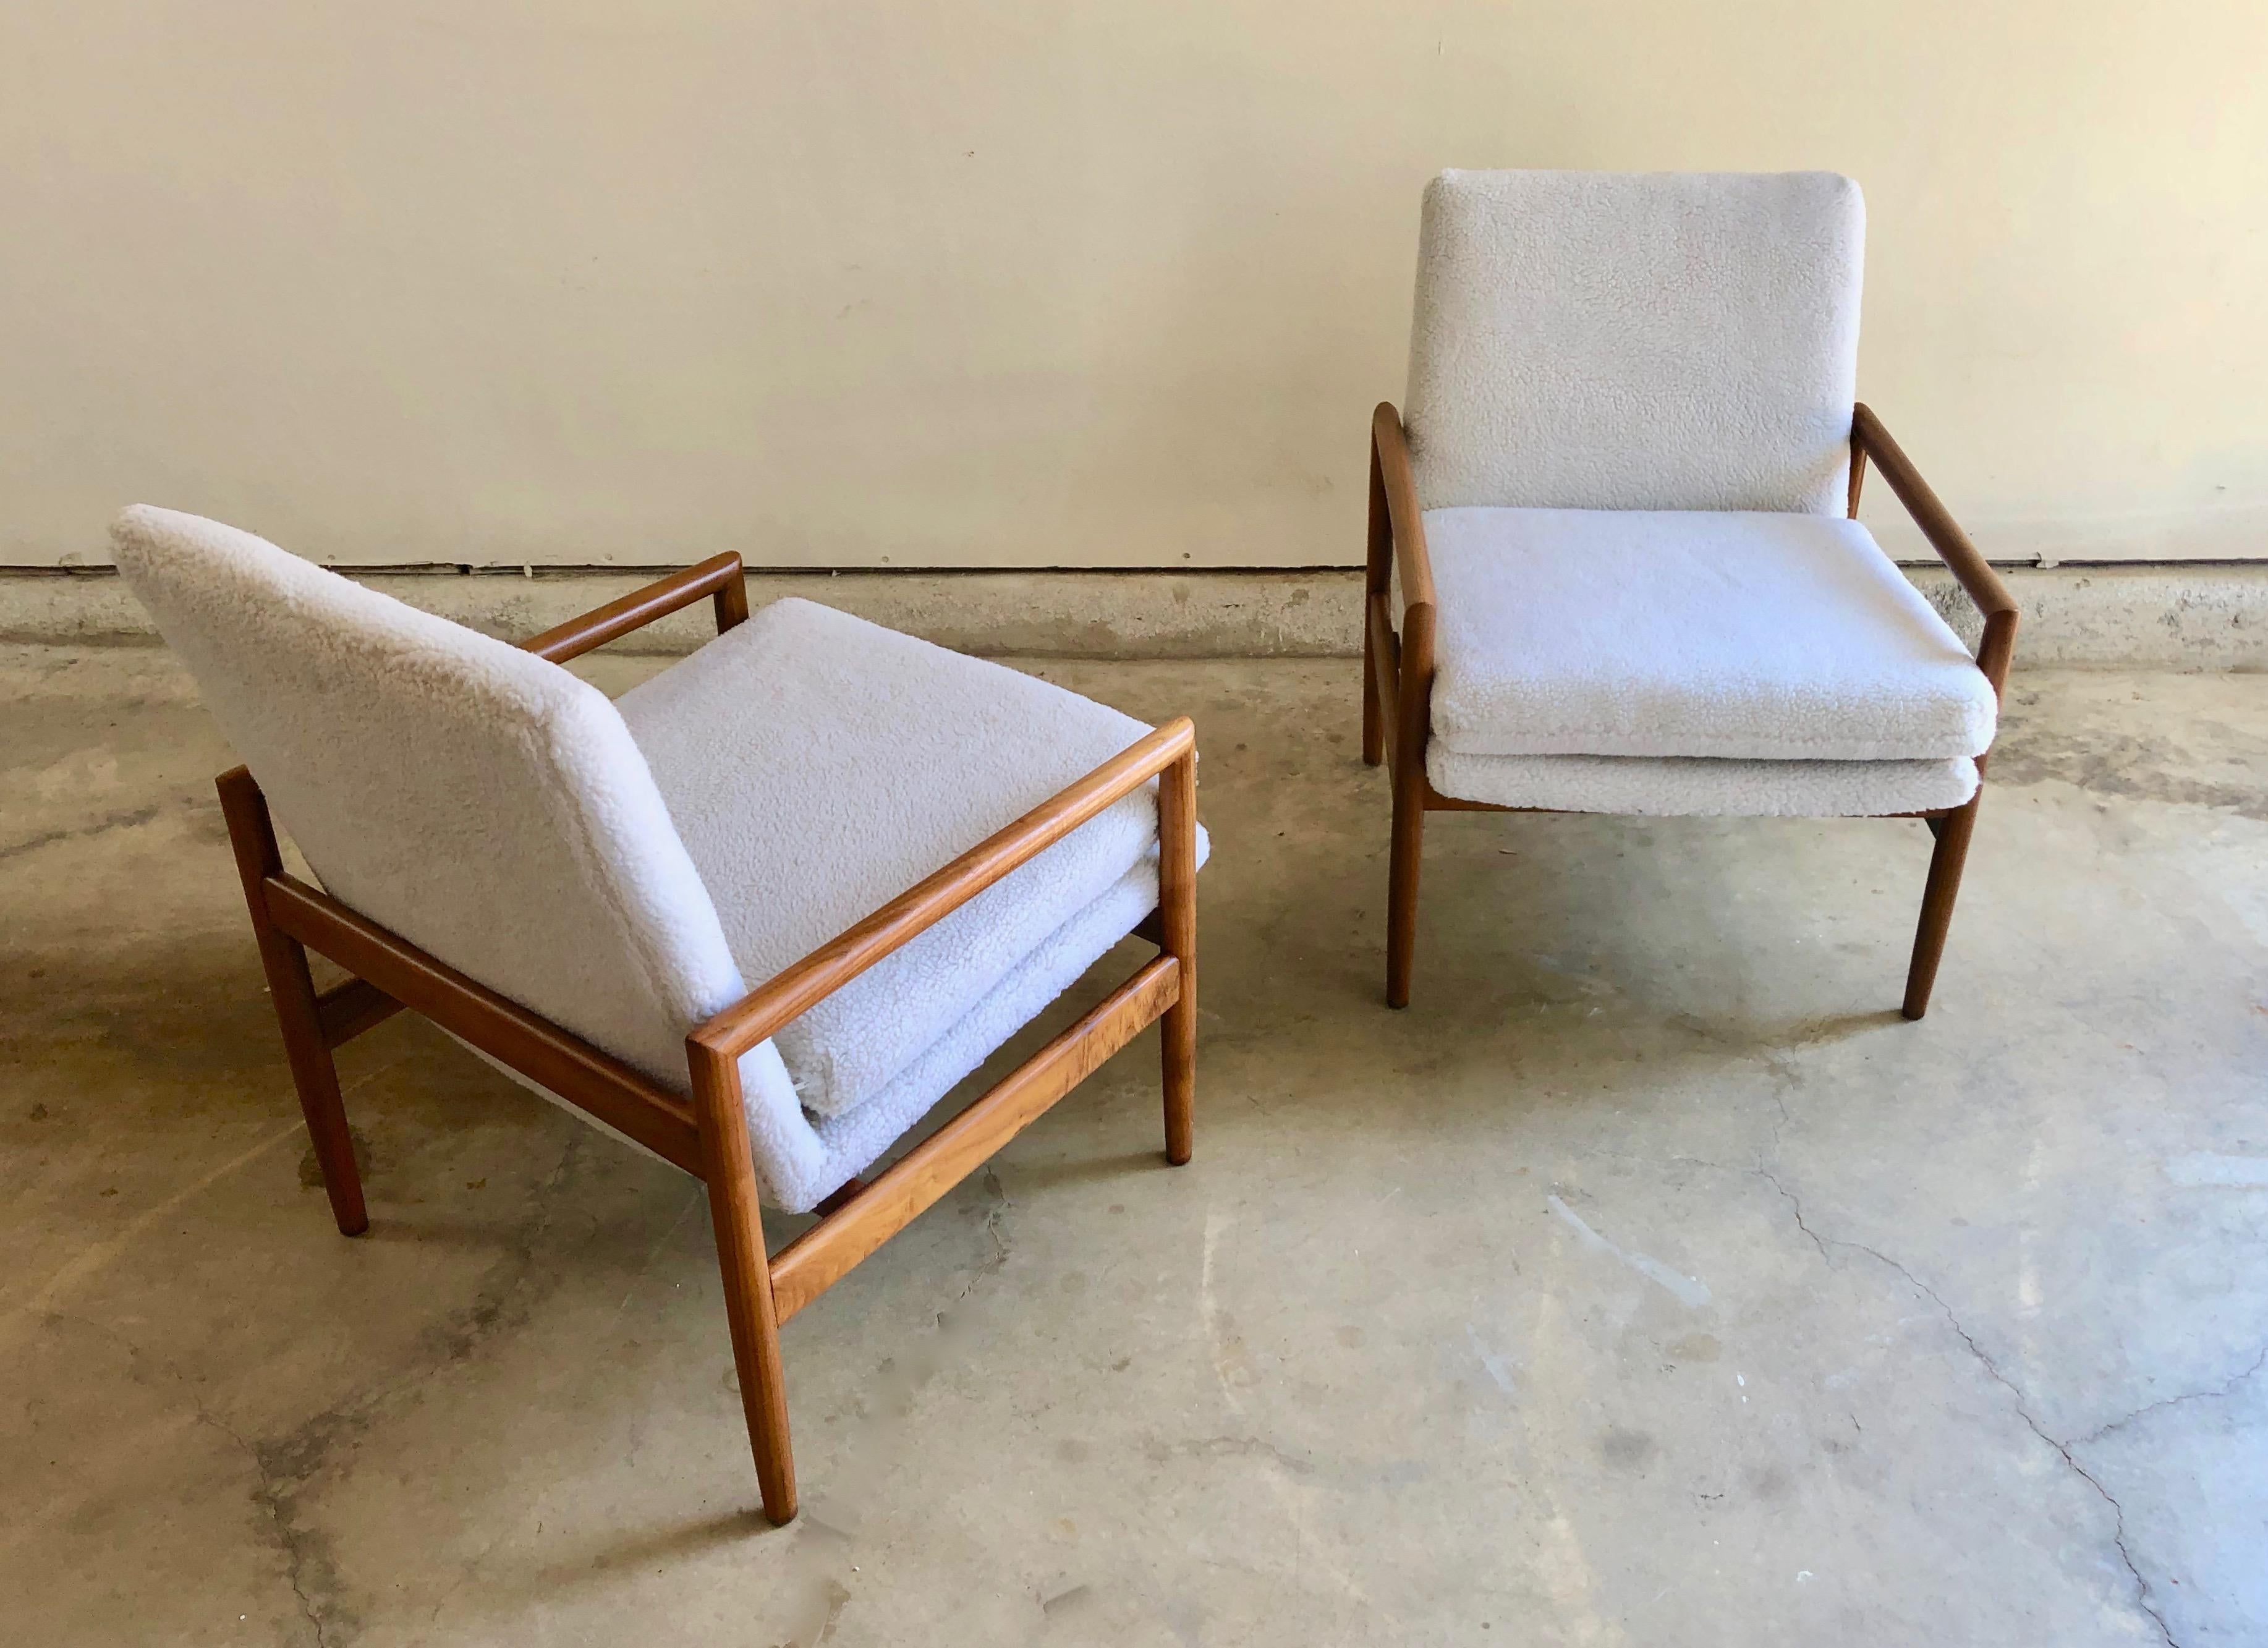 A very rare pair of Milo Baughman for Thayer Coggin lounge chairs. These are an earlier model that include the original labels. These chairs have been restored in a faux teddy bear ivory Sherpa fabric. Very modern and trendy. These are a true